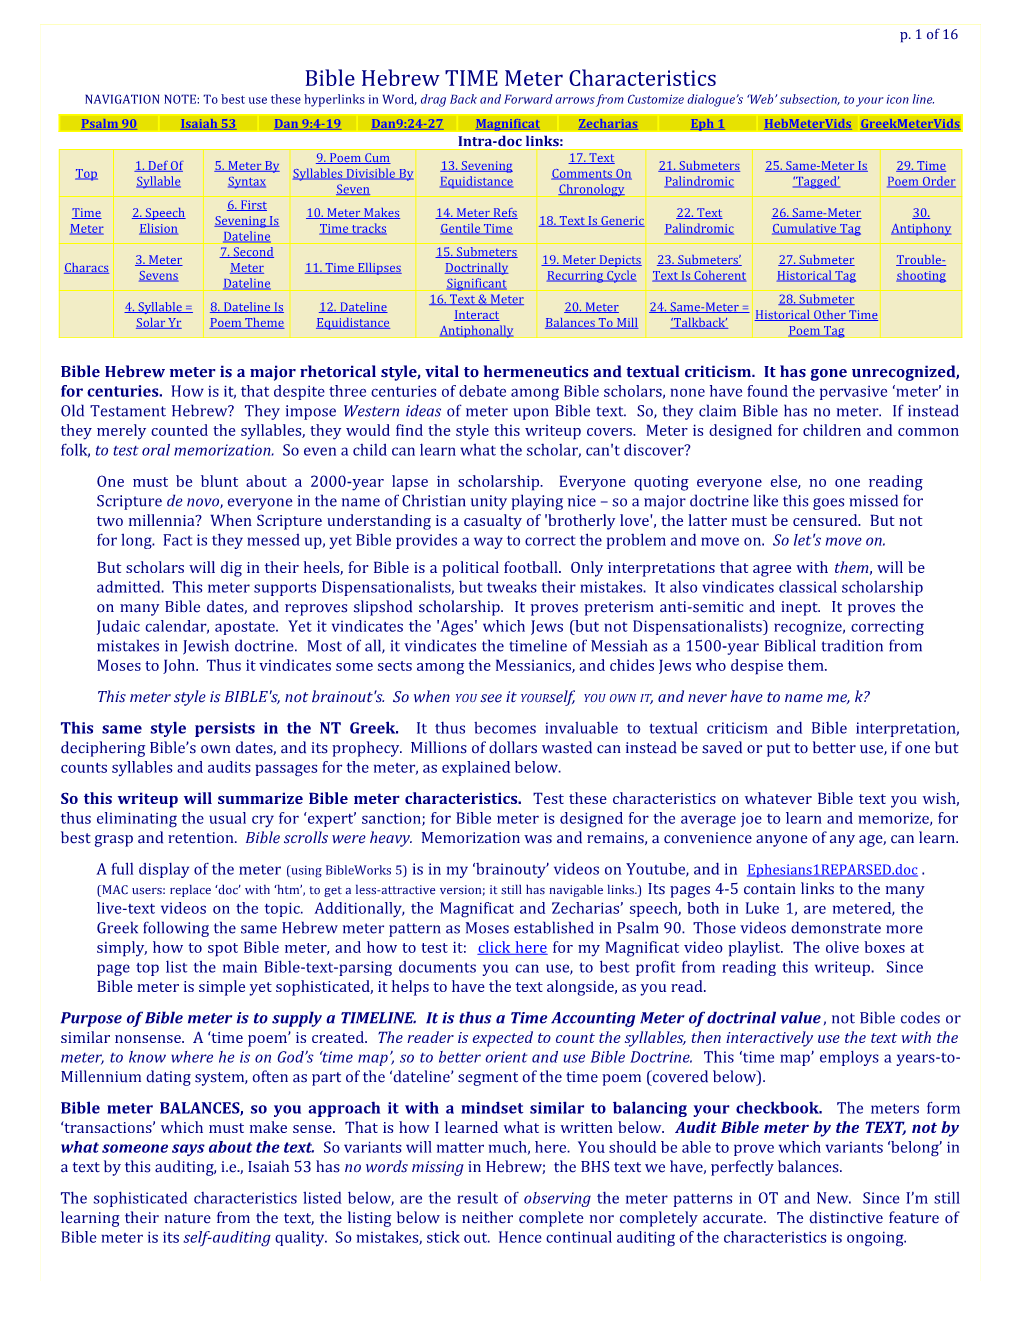 Bible Hebrew and Greek TIME Meter Characteristics